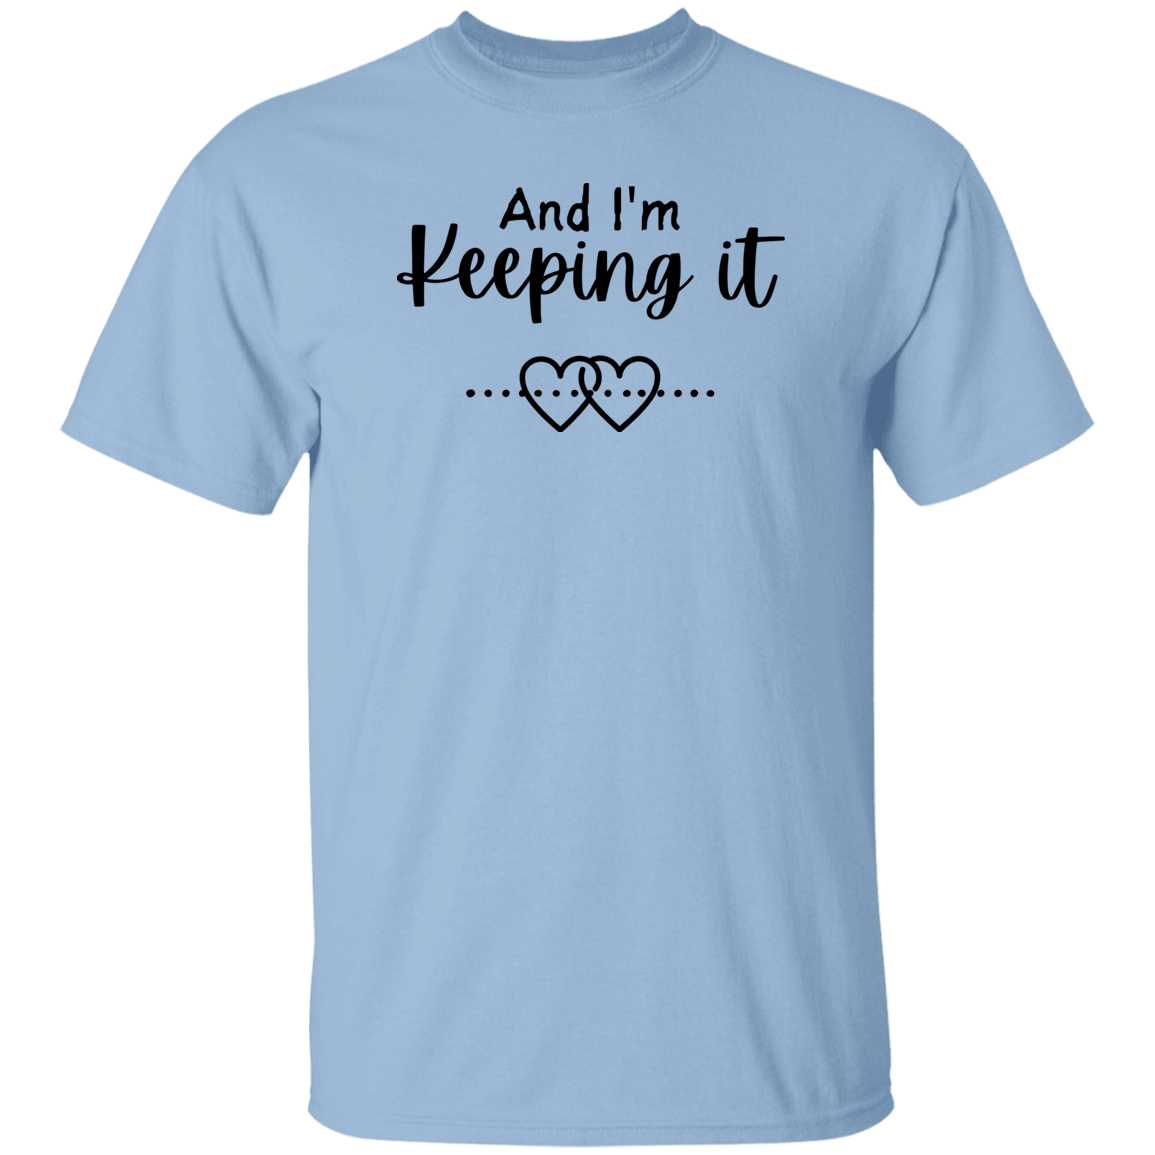 And I'm Keeping it! Tee Black writing